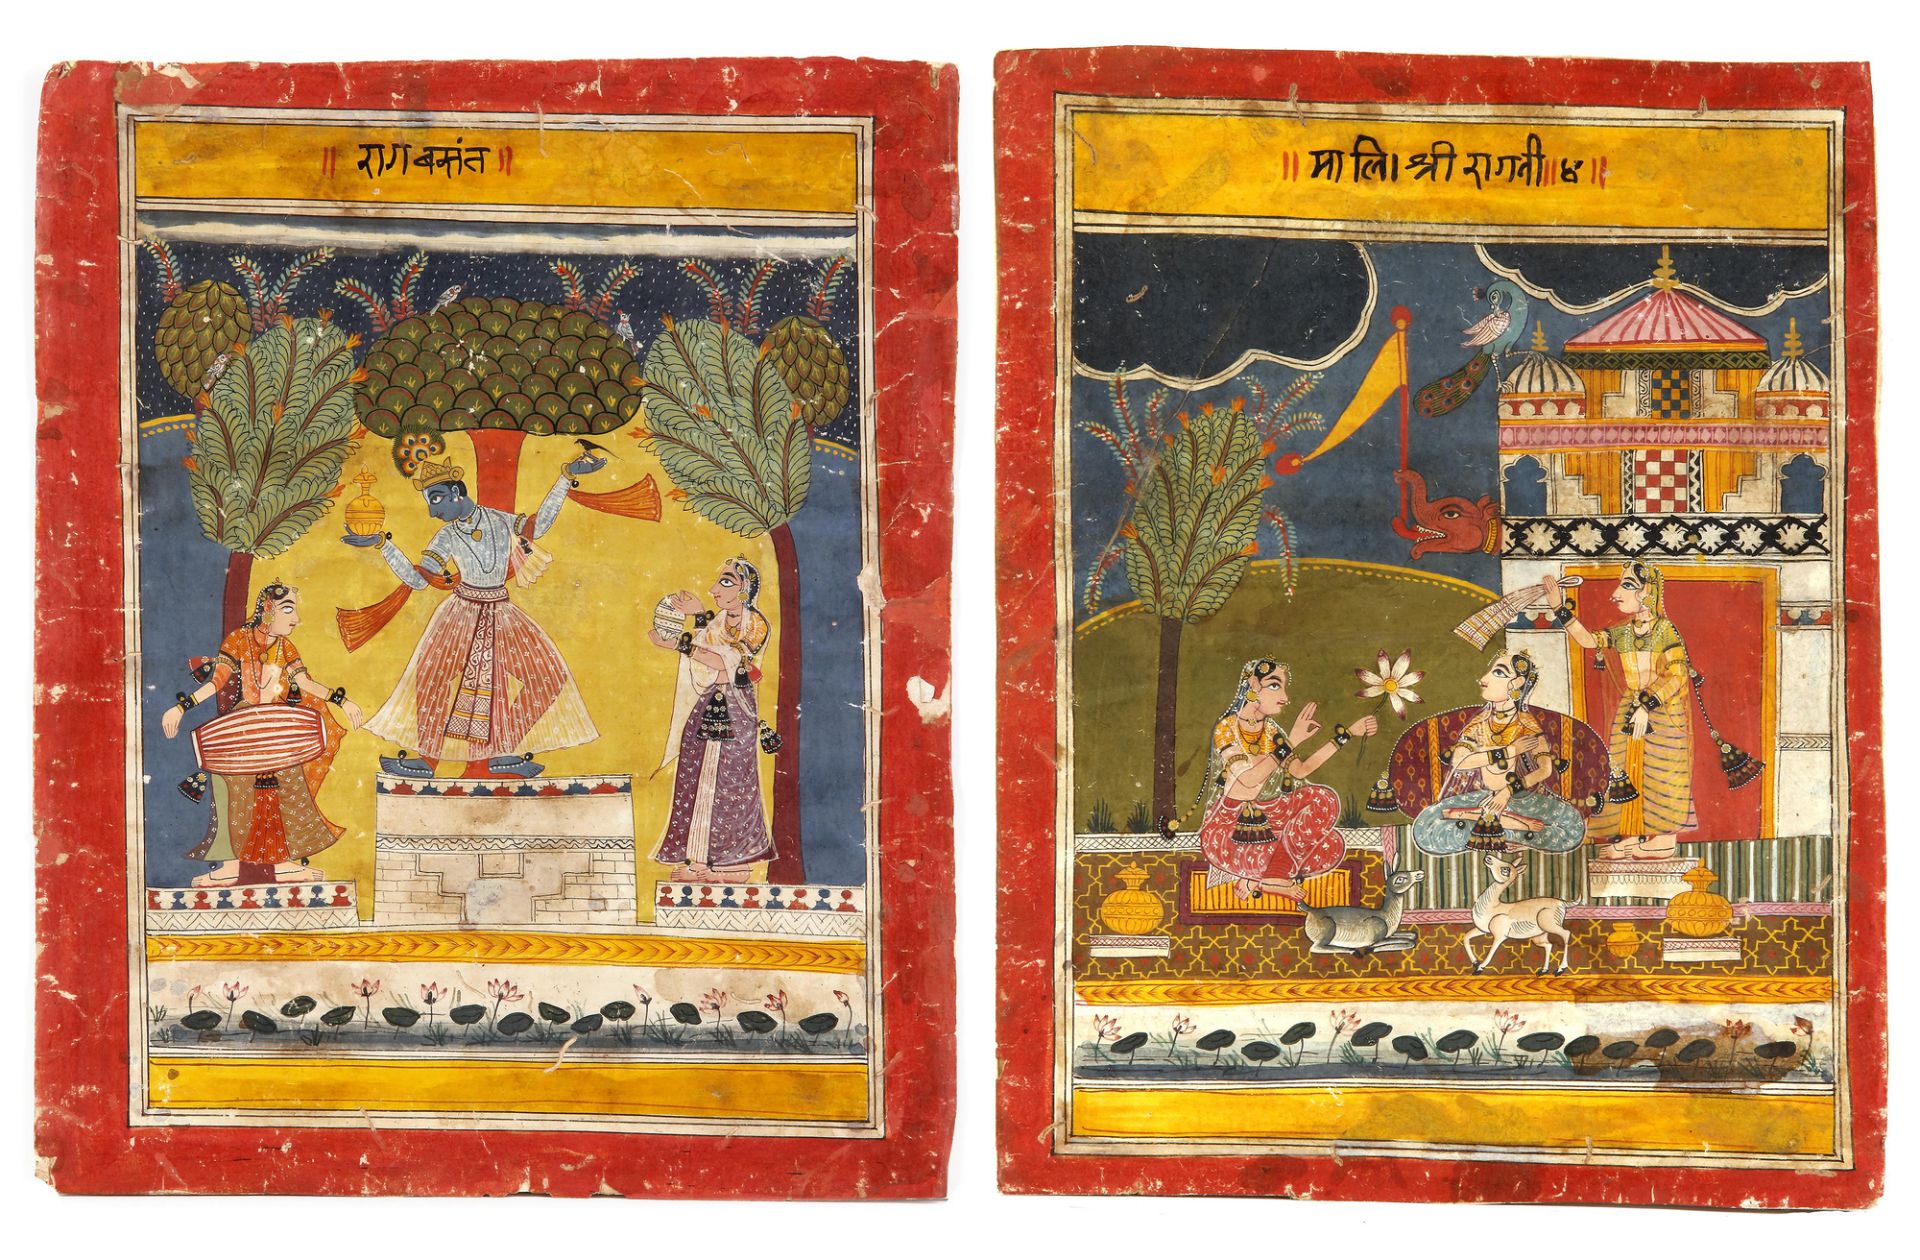 THREE IIIUSTRATIONS FROM A RAGAMALA SERIES, CENTRAL INDIA, MALWA, 17TH CENTURY